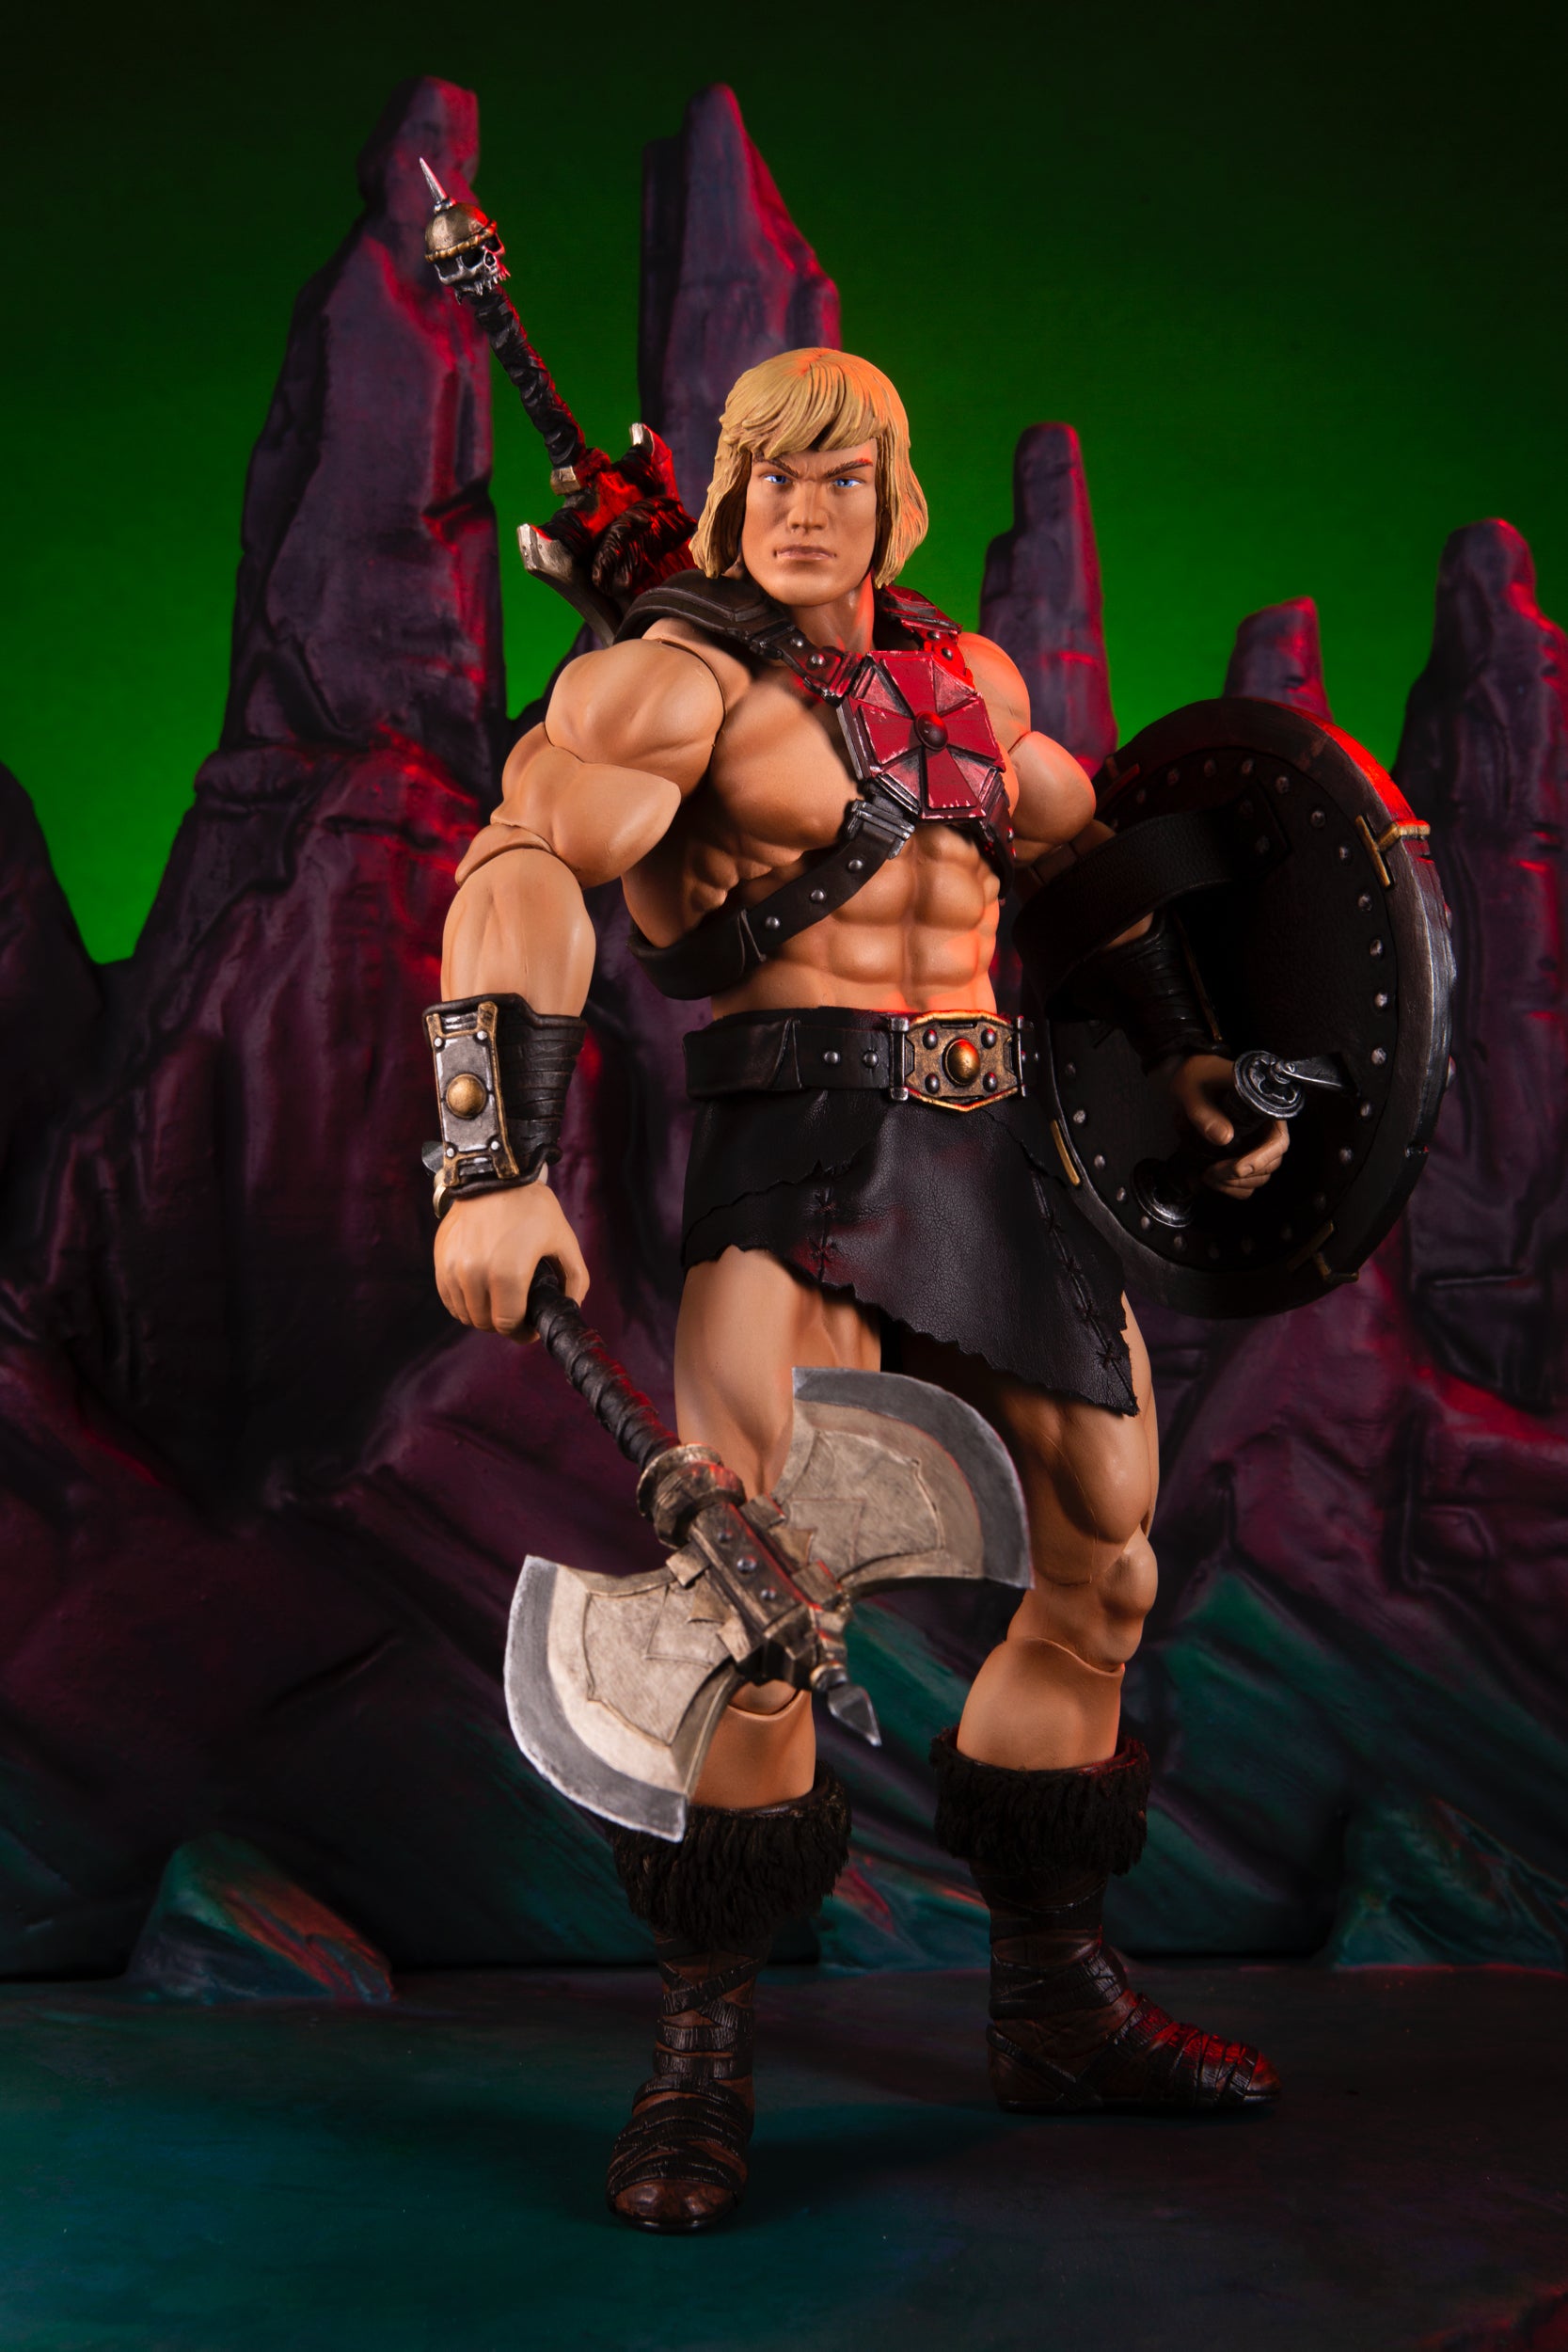 new he man toys 2019